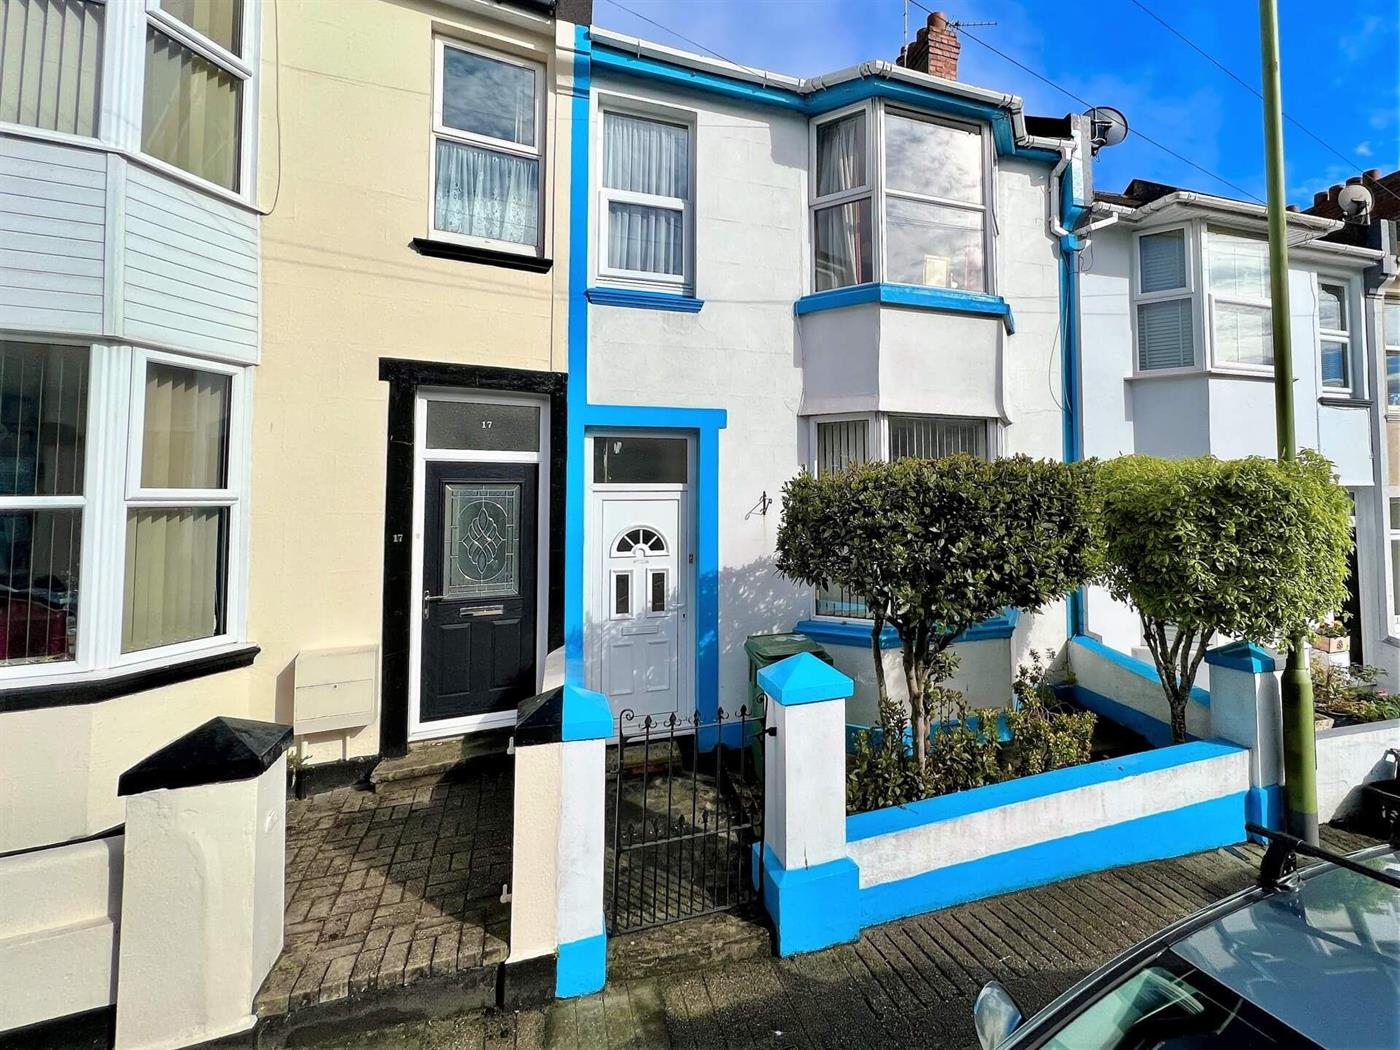 3 Bedroom Terraced House for Sale (Sold): Forest Road, Upton, Torquay, TQ1 4JP